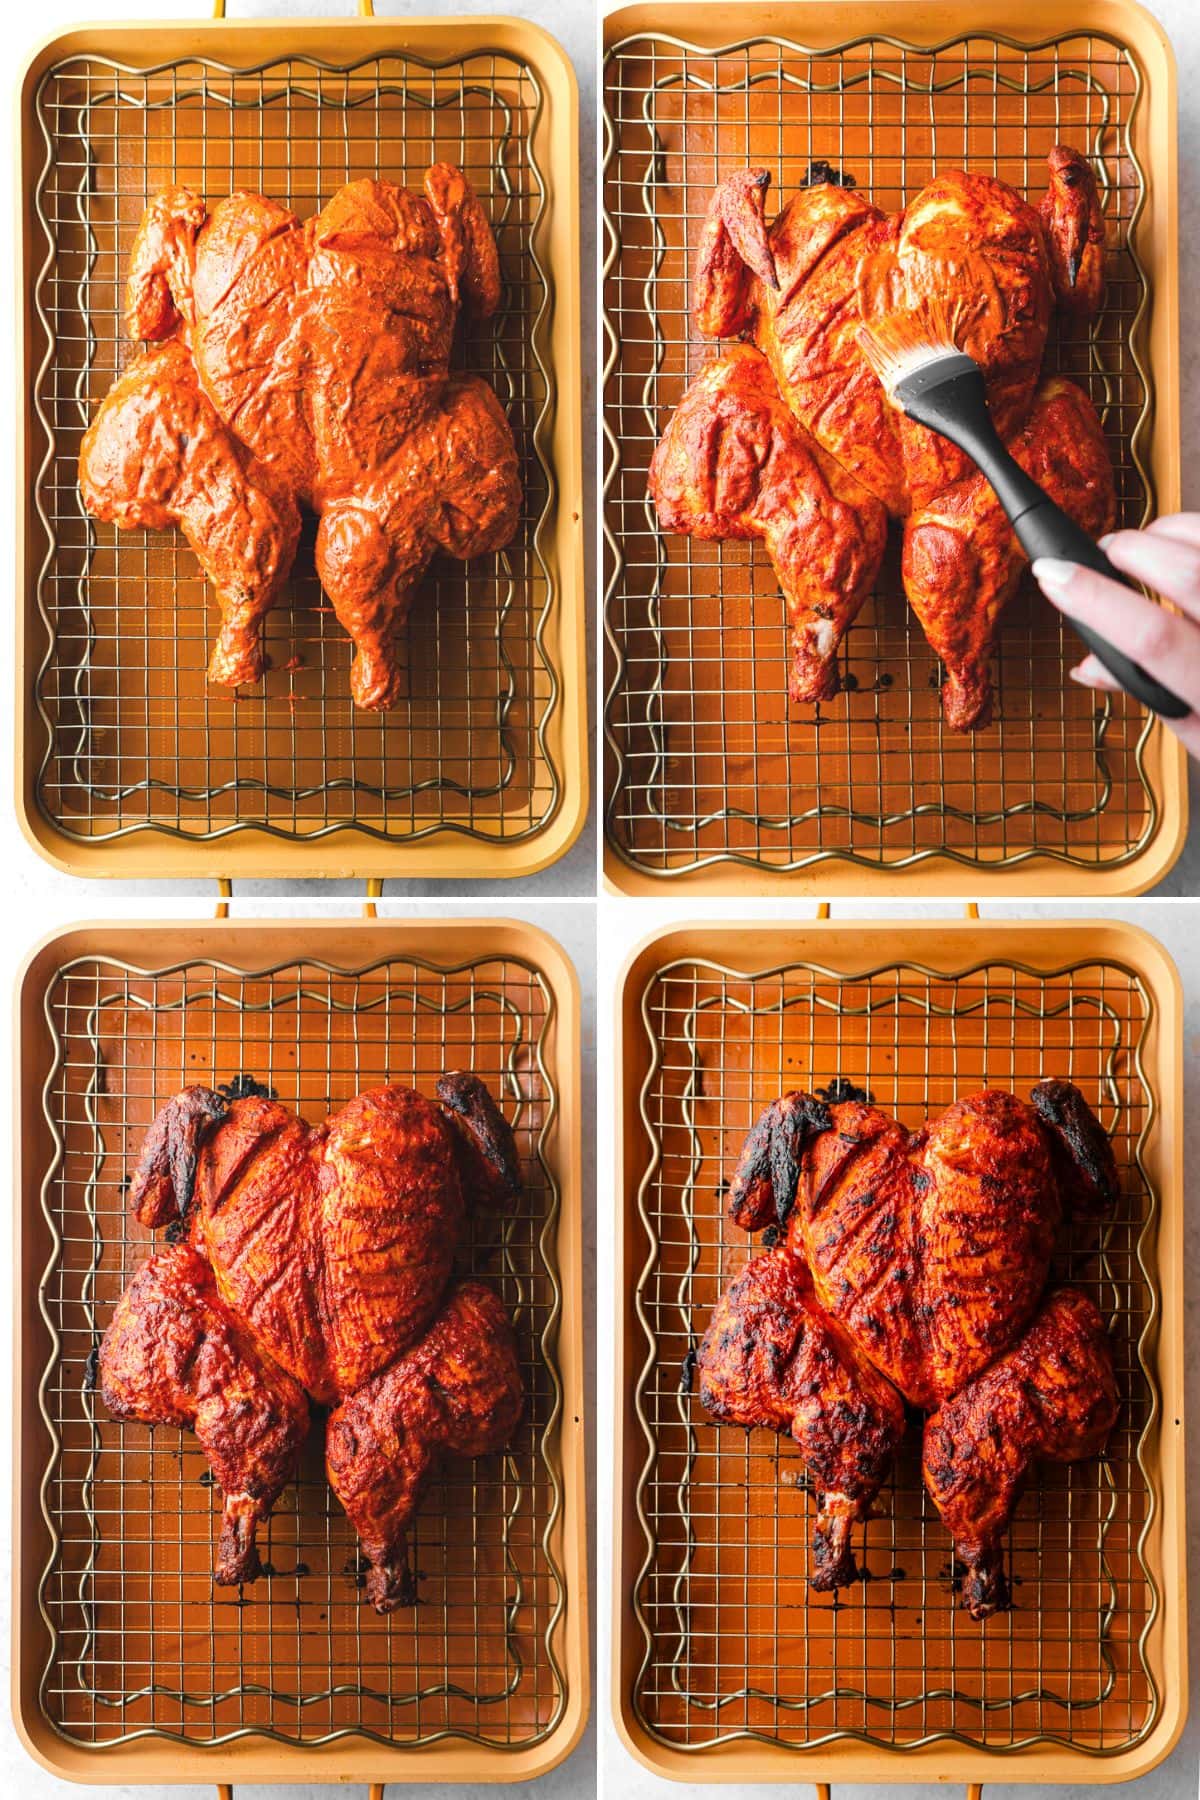 Collage of a marinated Spatchcocked Whole Tandoori Chicken in a baking tray baked, basted, baked again, and then broiled.